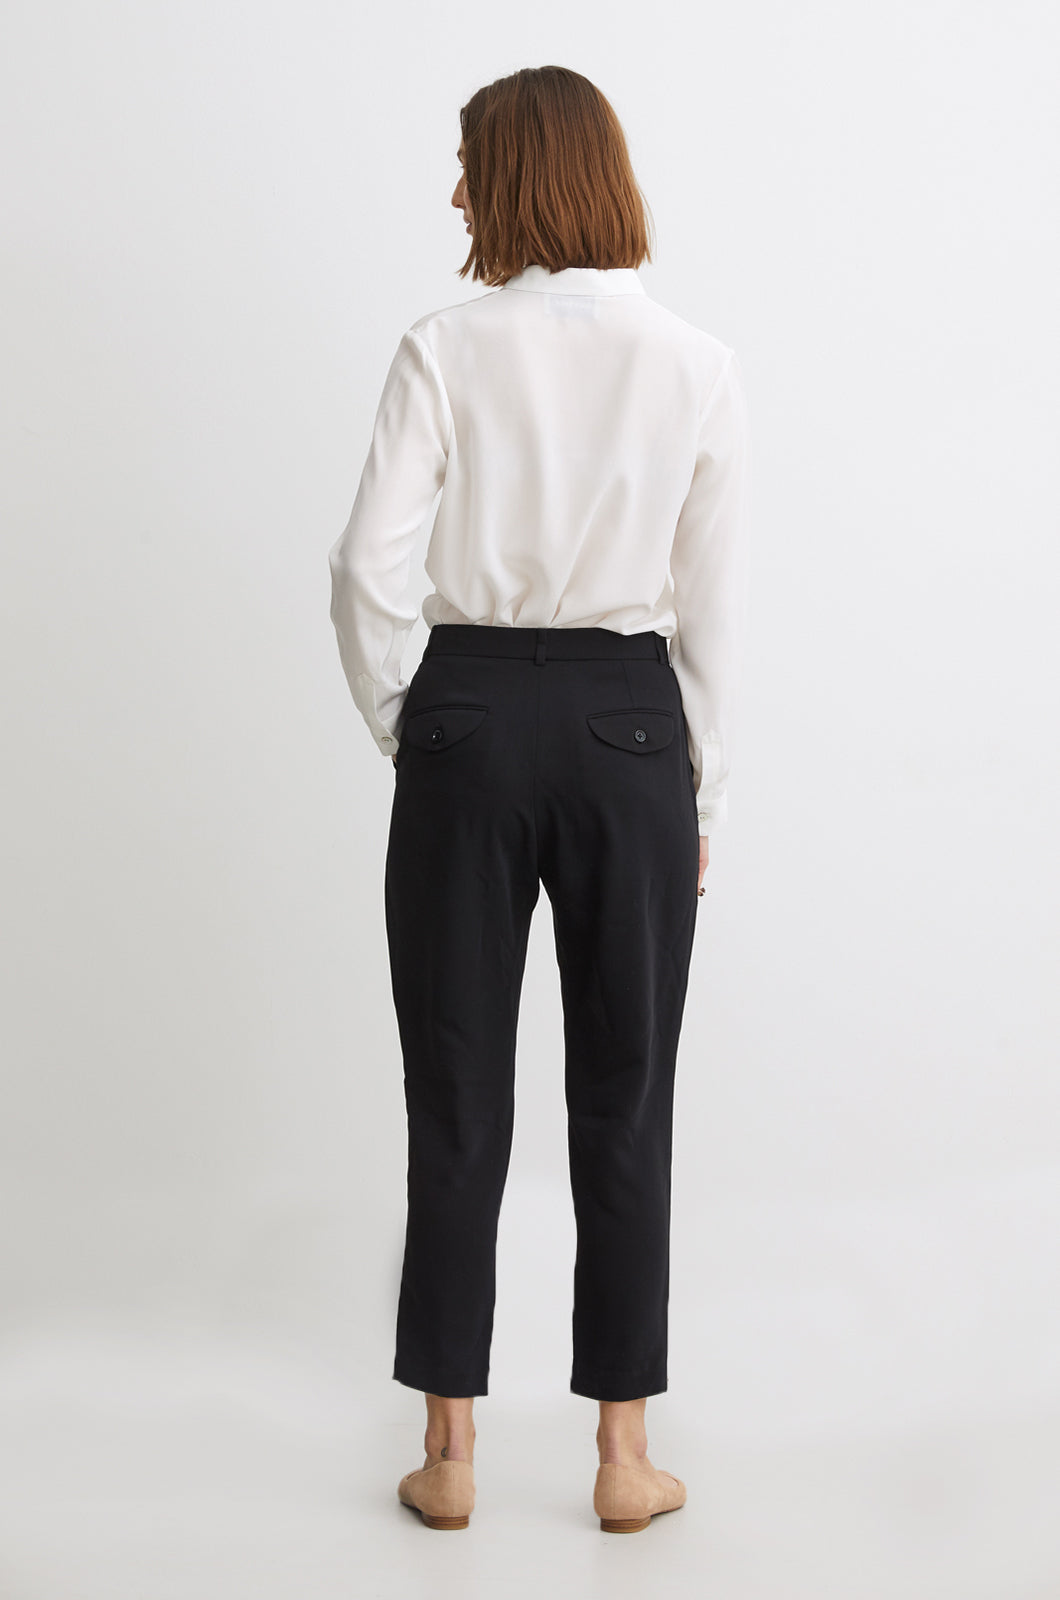 5 Must-Have Trousers Every Guy Should Own